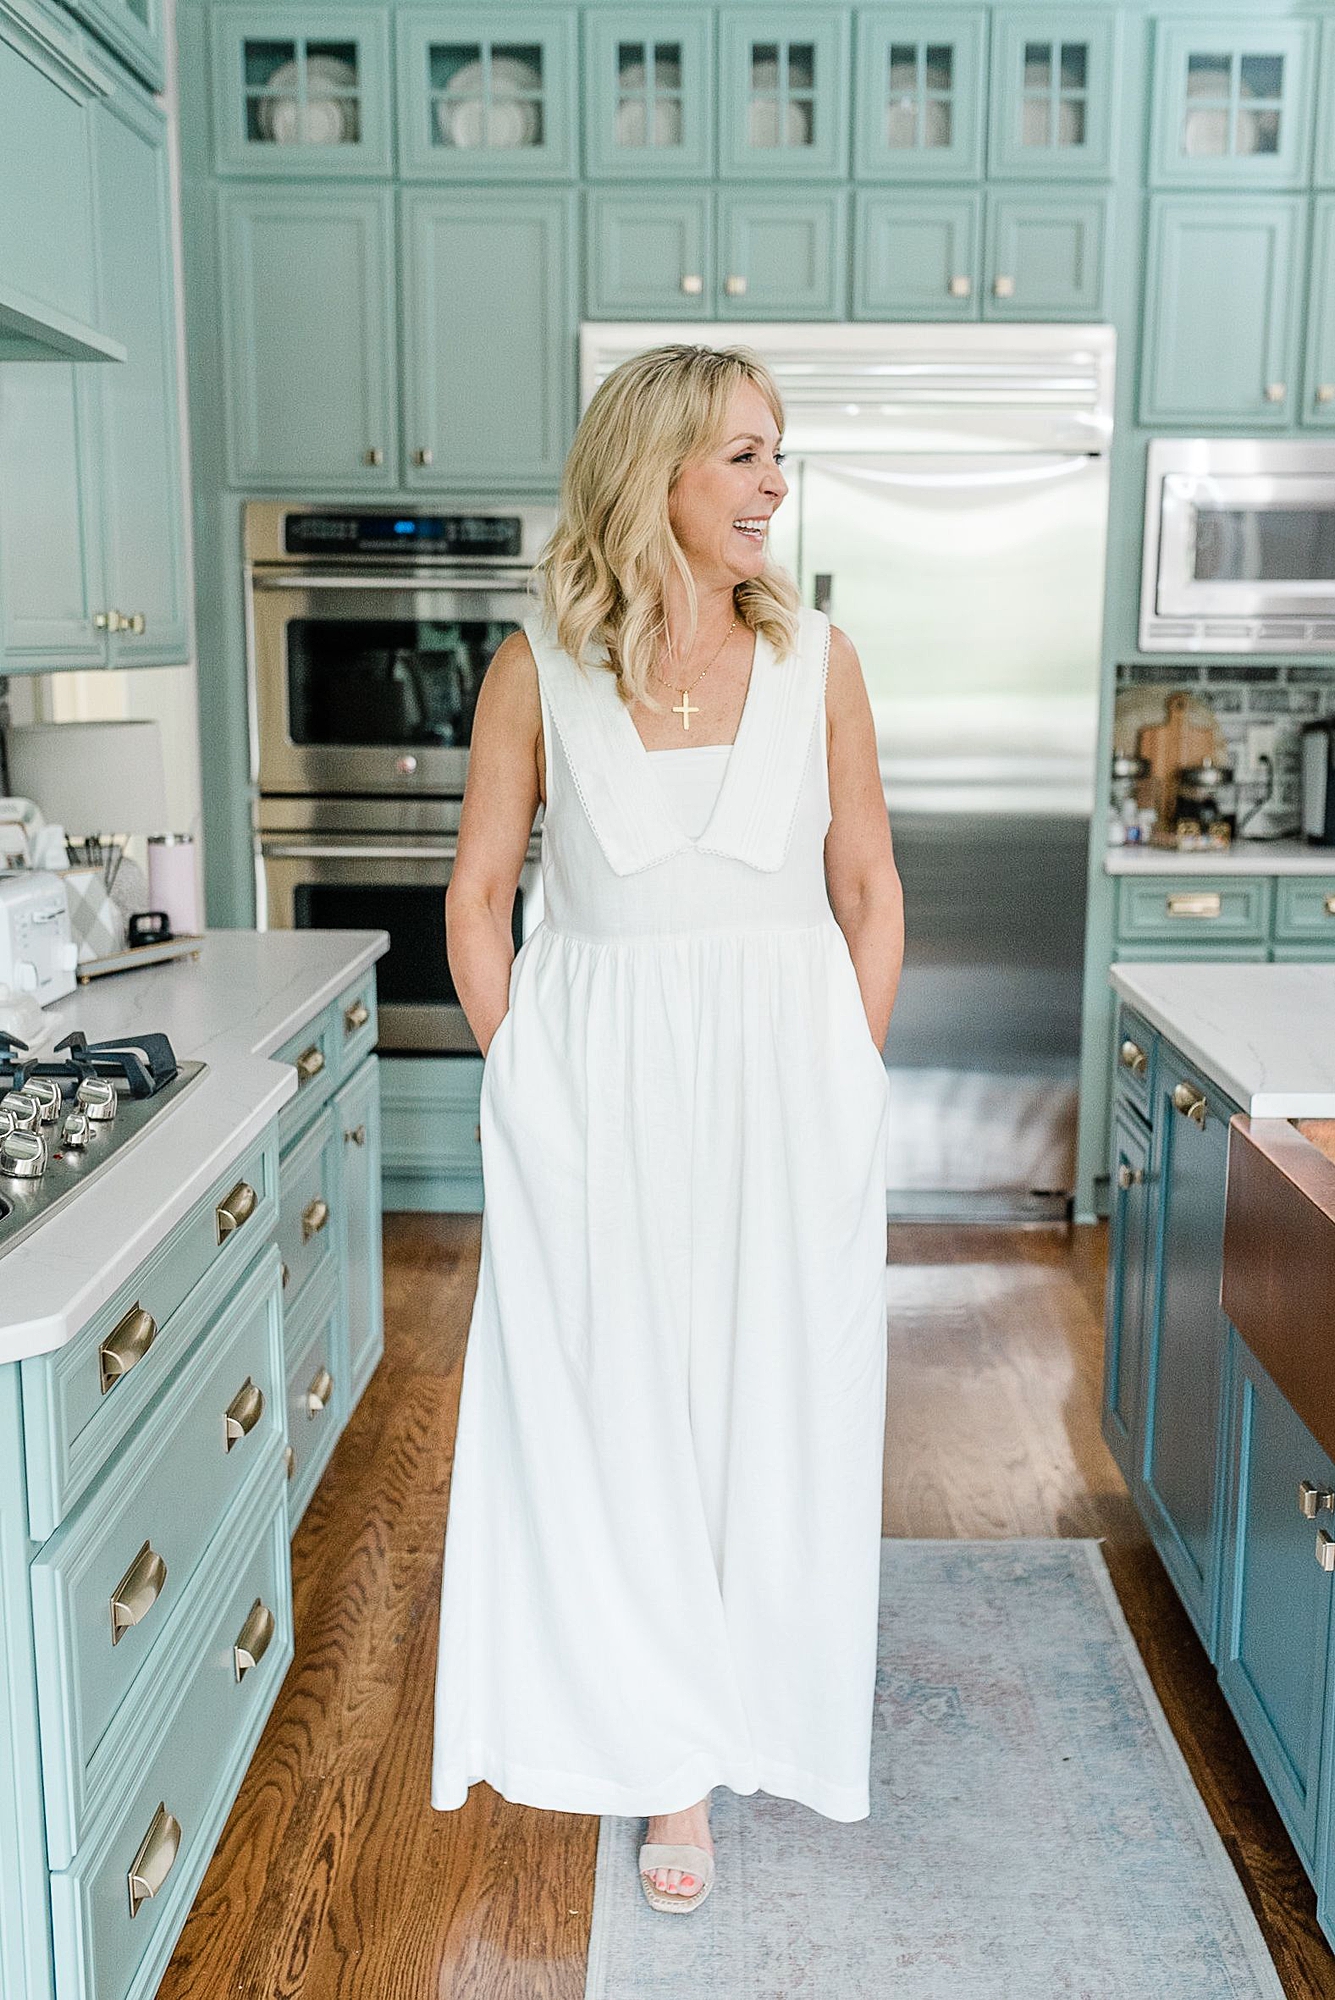 a_middle_aged_woman_is_taking_her_Nashville_branding_photos_for_her_real_estate_business_standing_in_a_big_kitchen